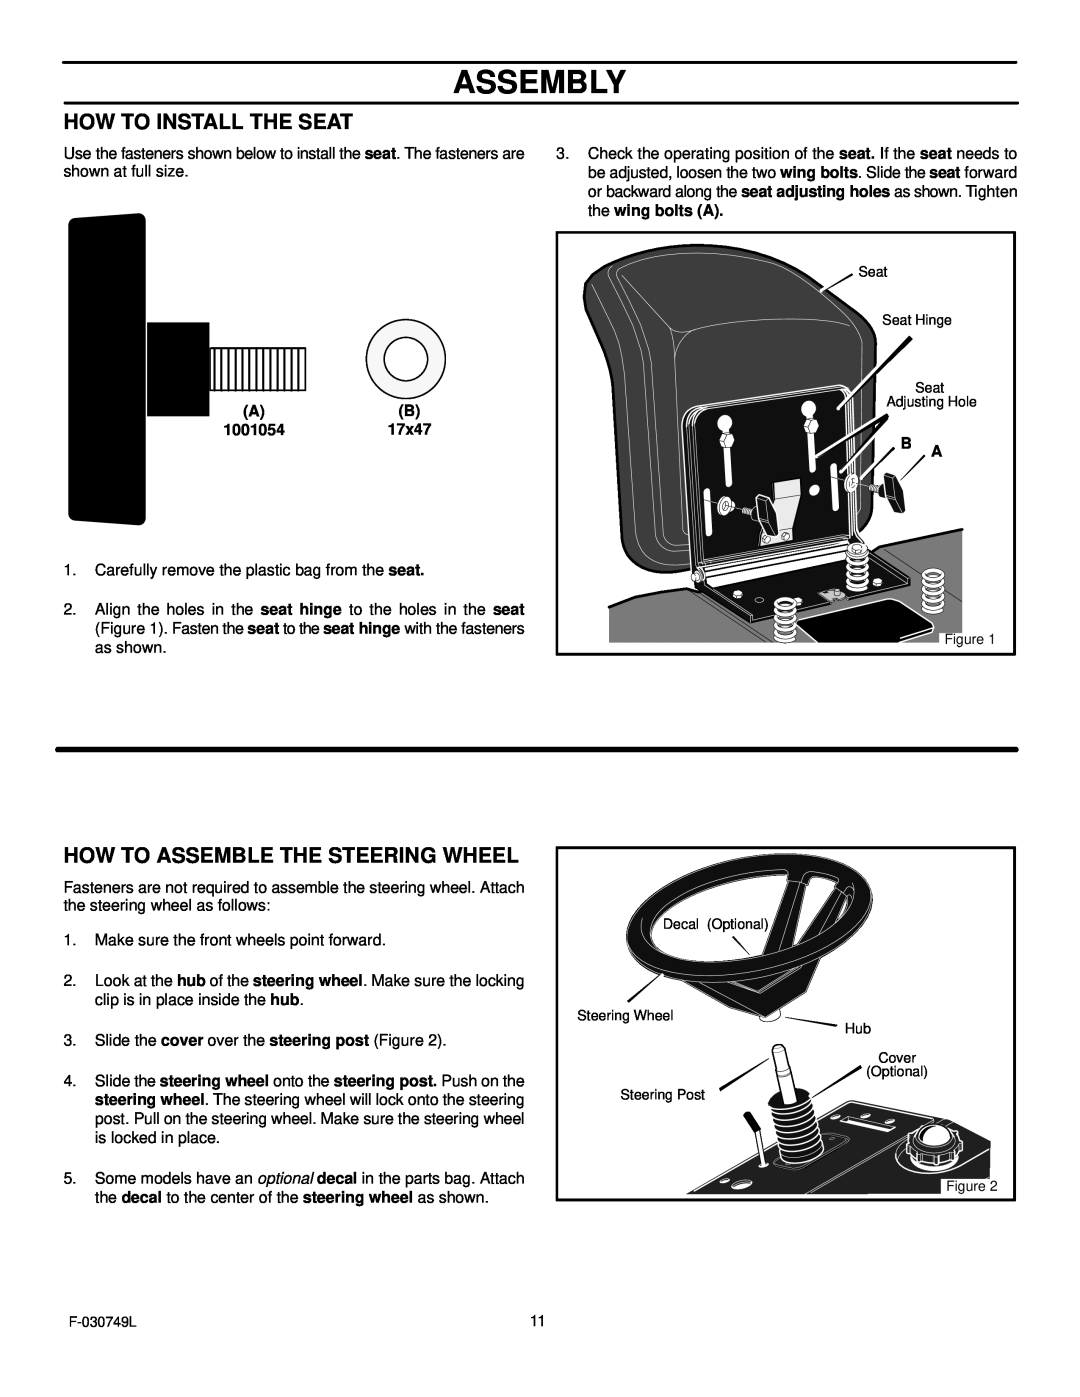 Murray 405030x48A manual Assembly, How To Install The Seat, How To Assemble The Steering Wheel 